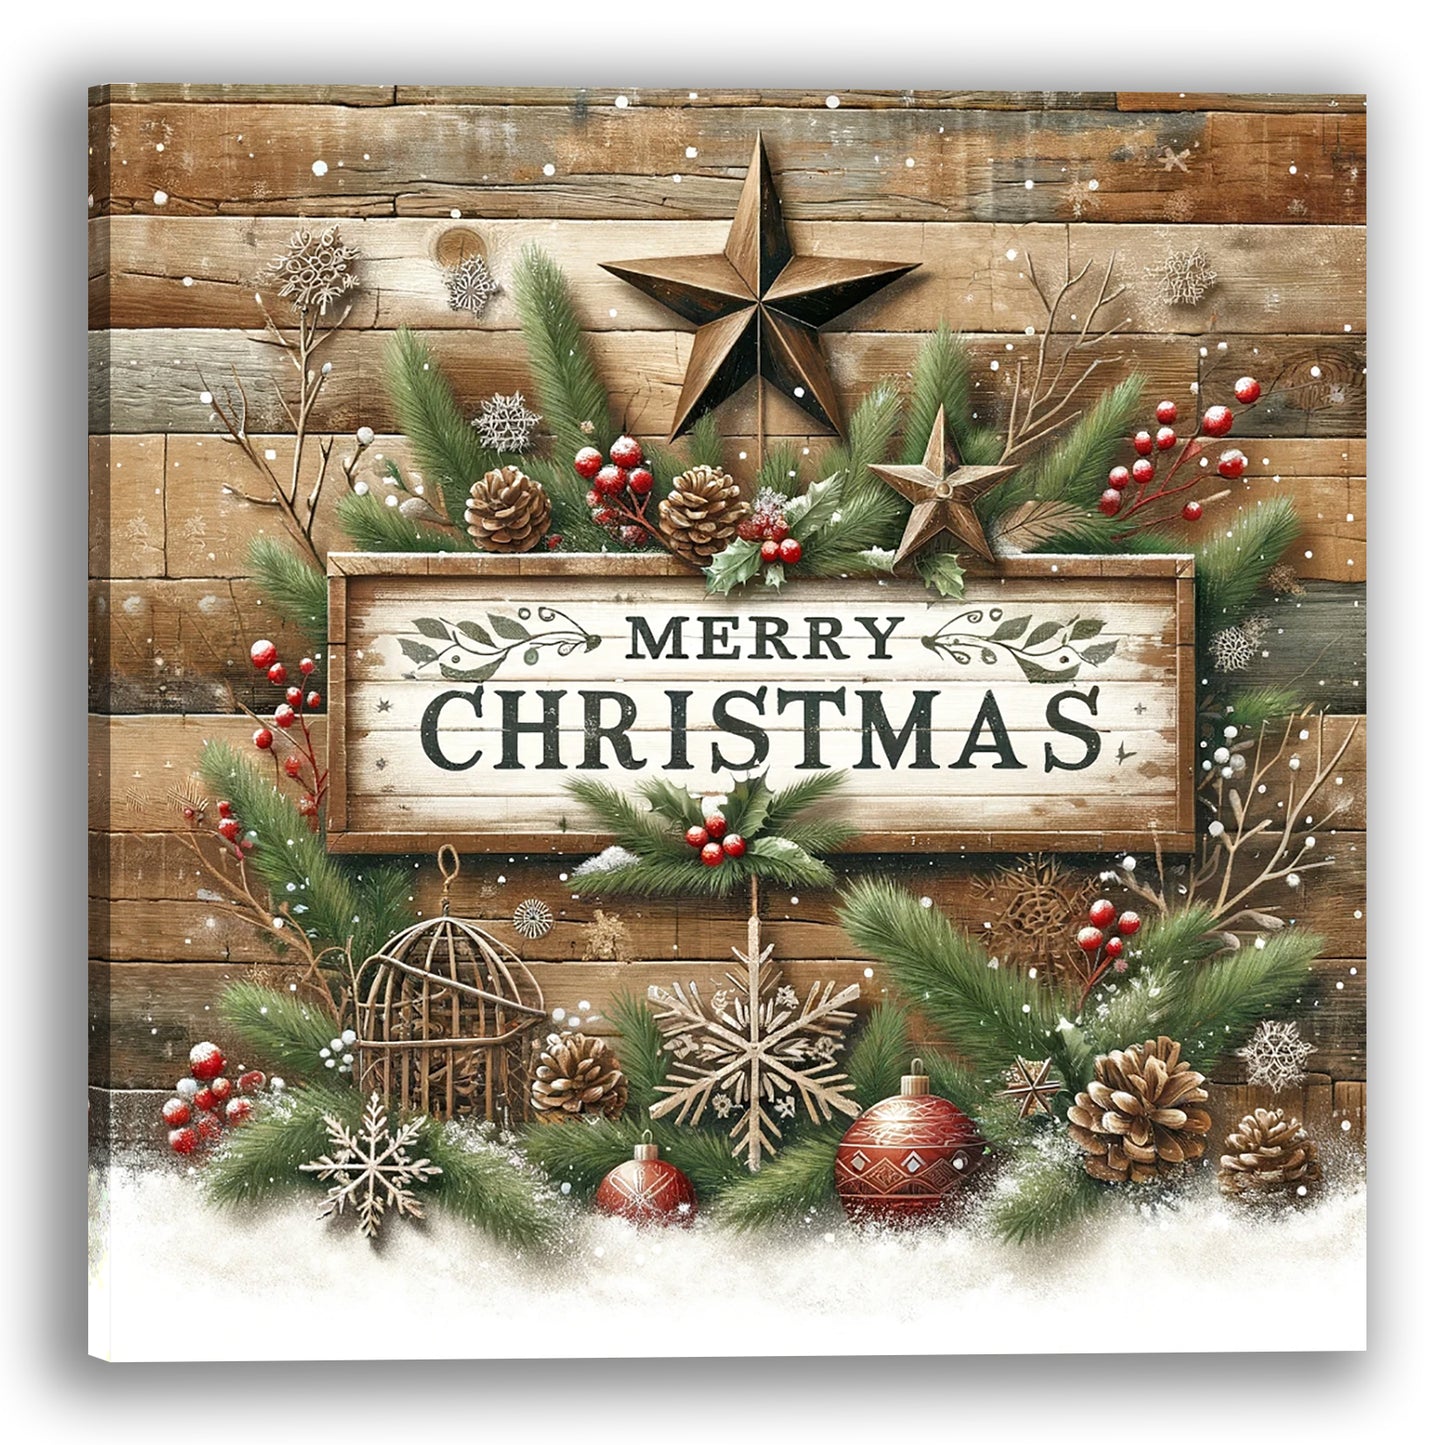 "Rustic Holiday Greetings - Festive Christmas Sign" Wrapped Canvas Art Prints